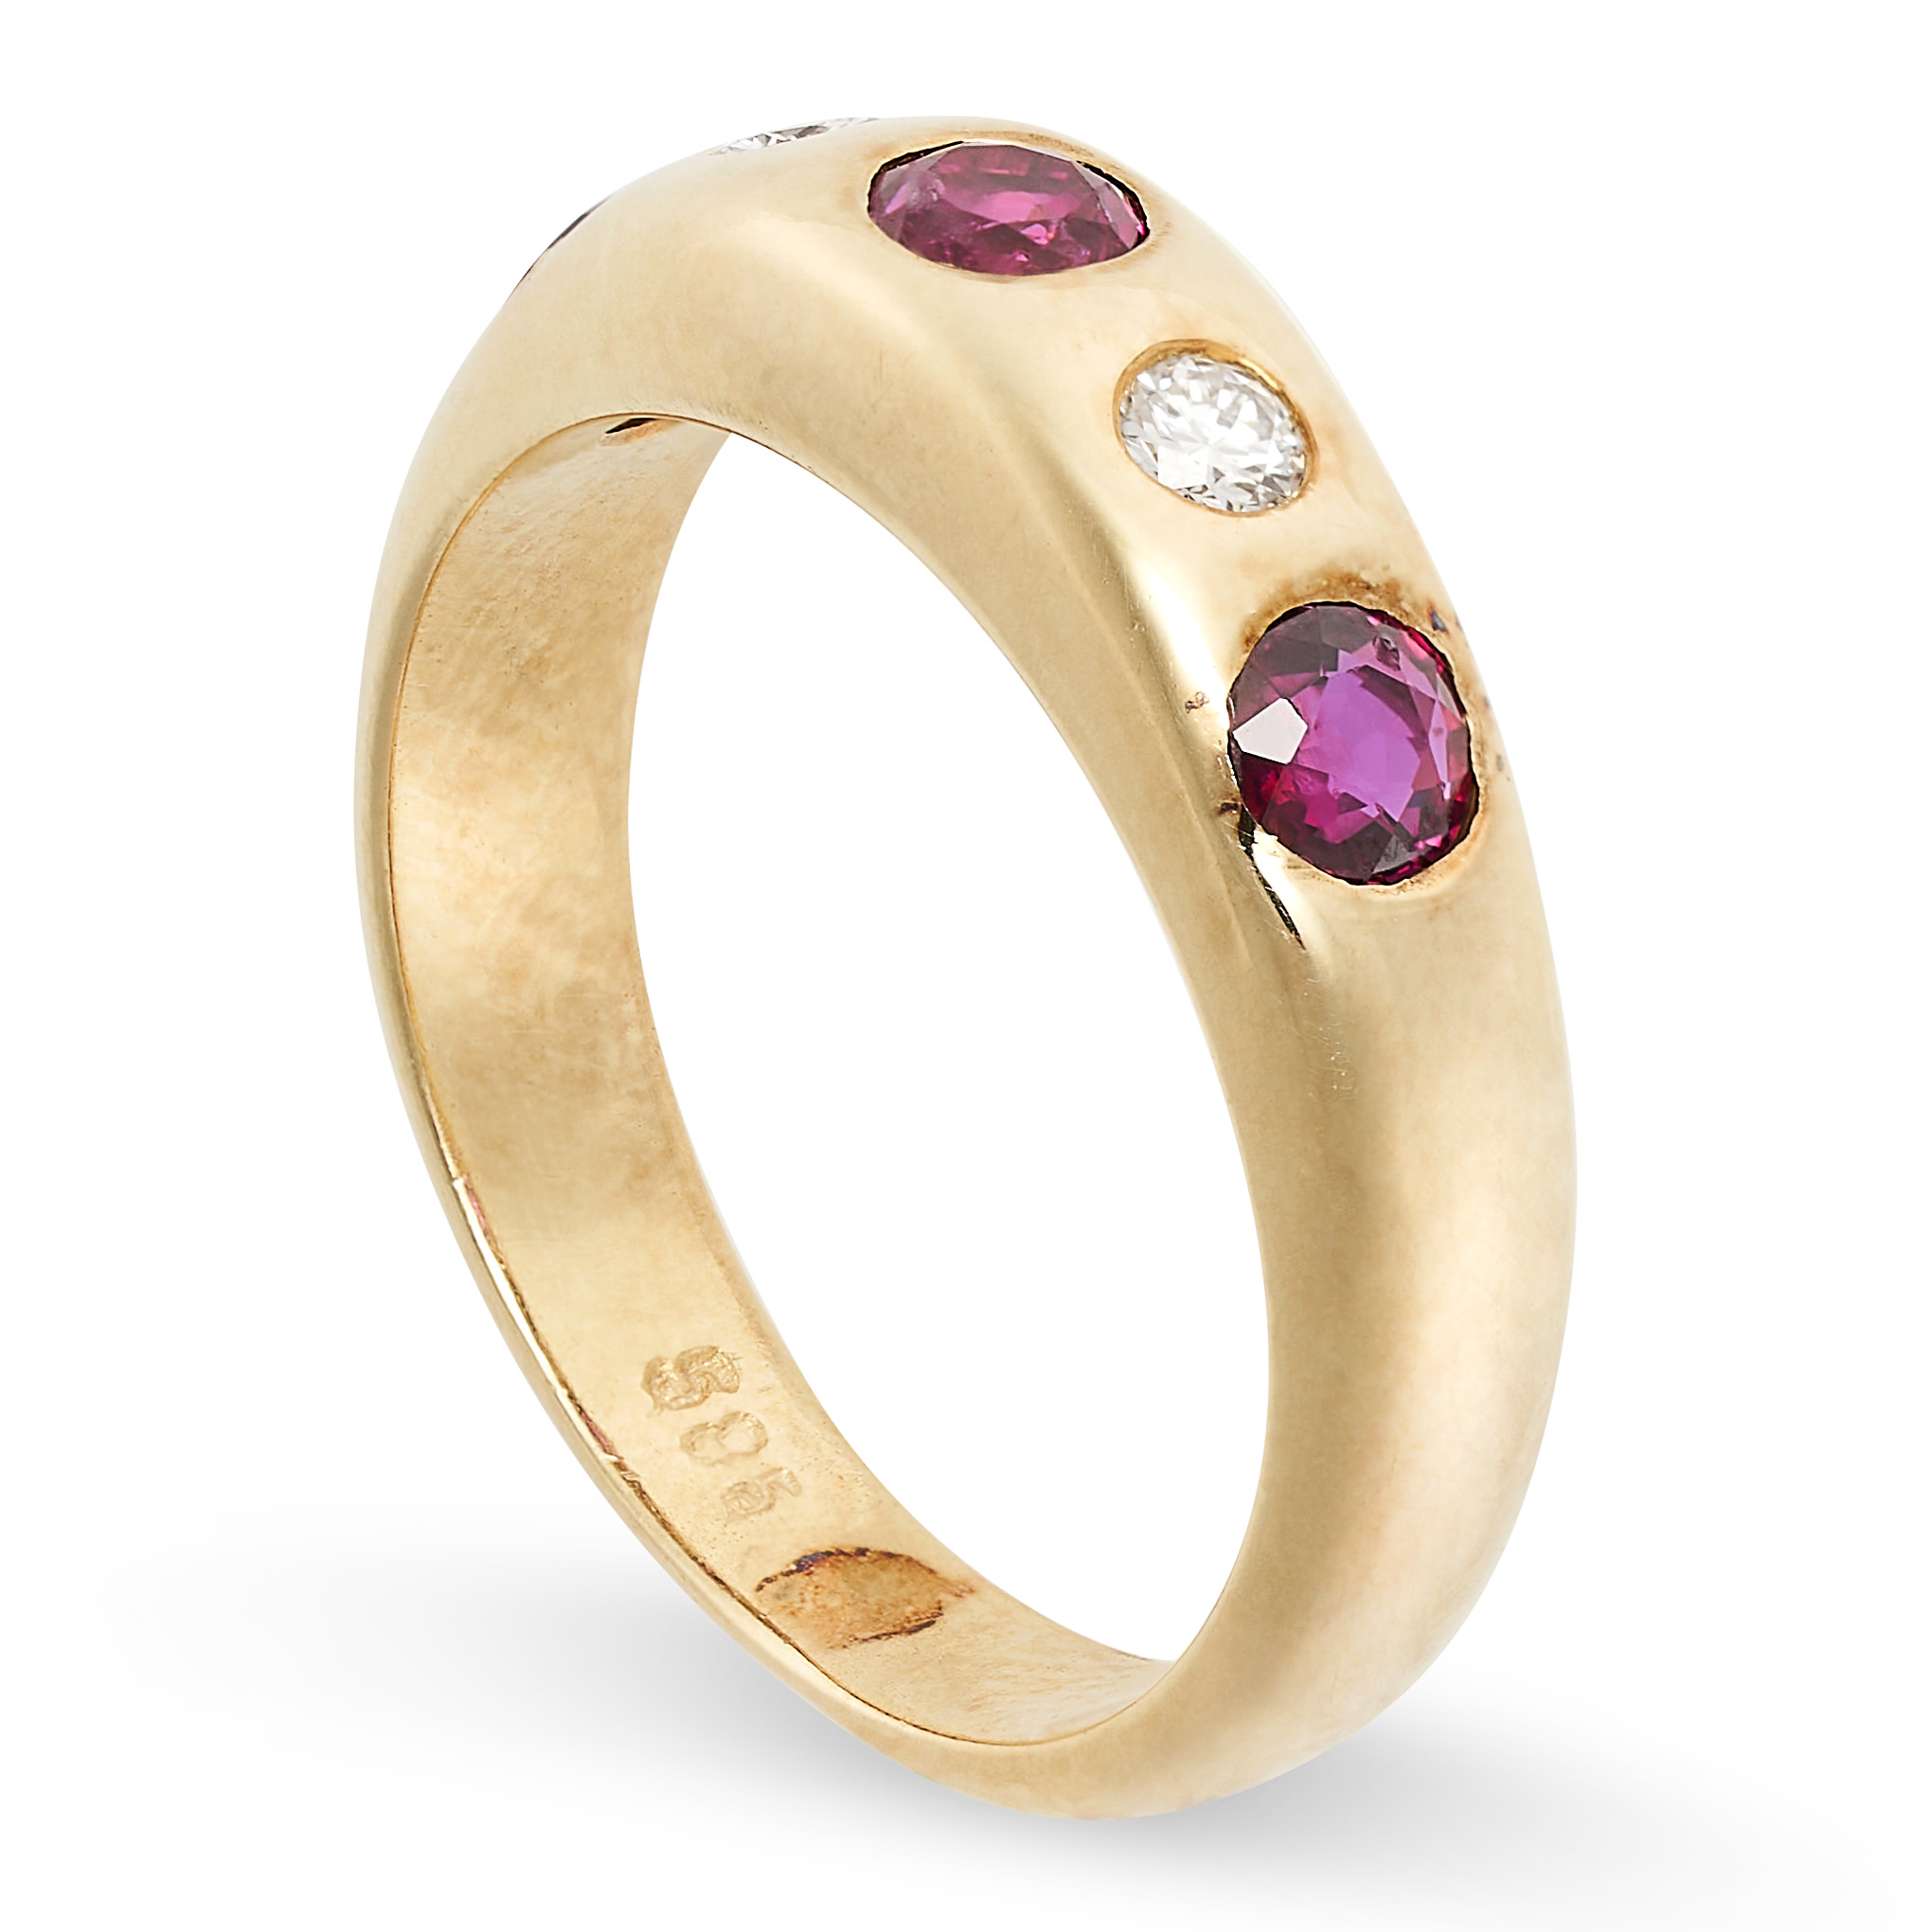 A VINTAGE RUBY AND DIAMOND GYPSY RING in 14ct yellow gold, set with three round cut rubies and two - Image 2 of 2